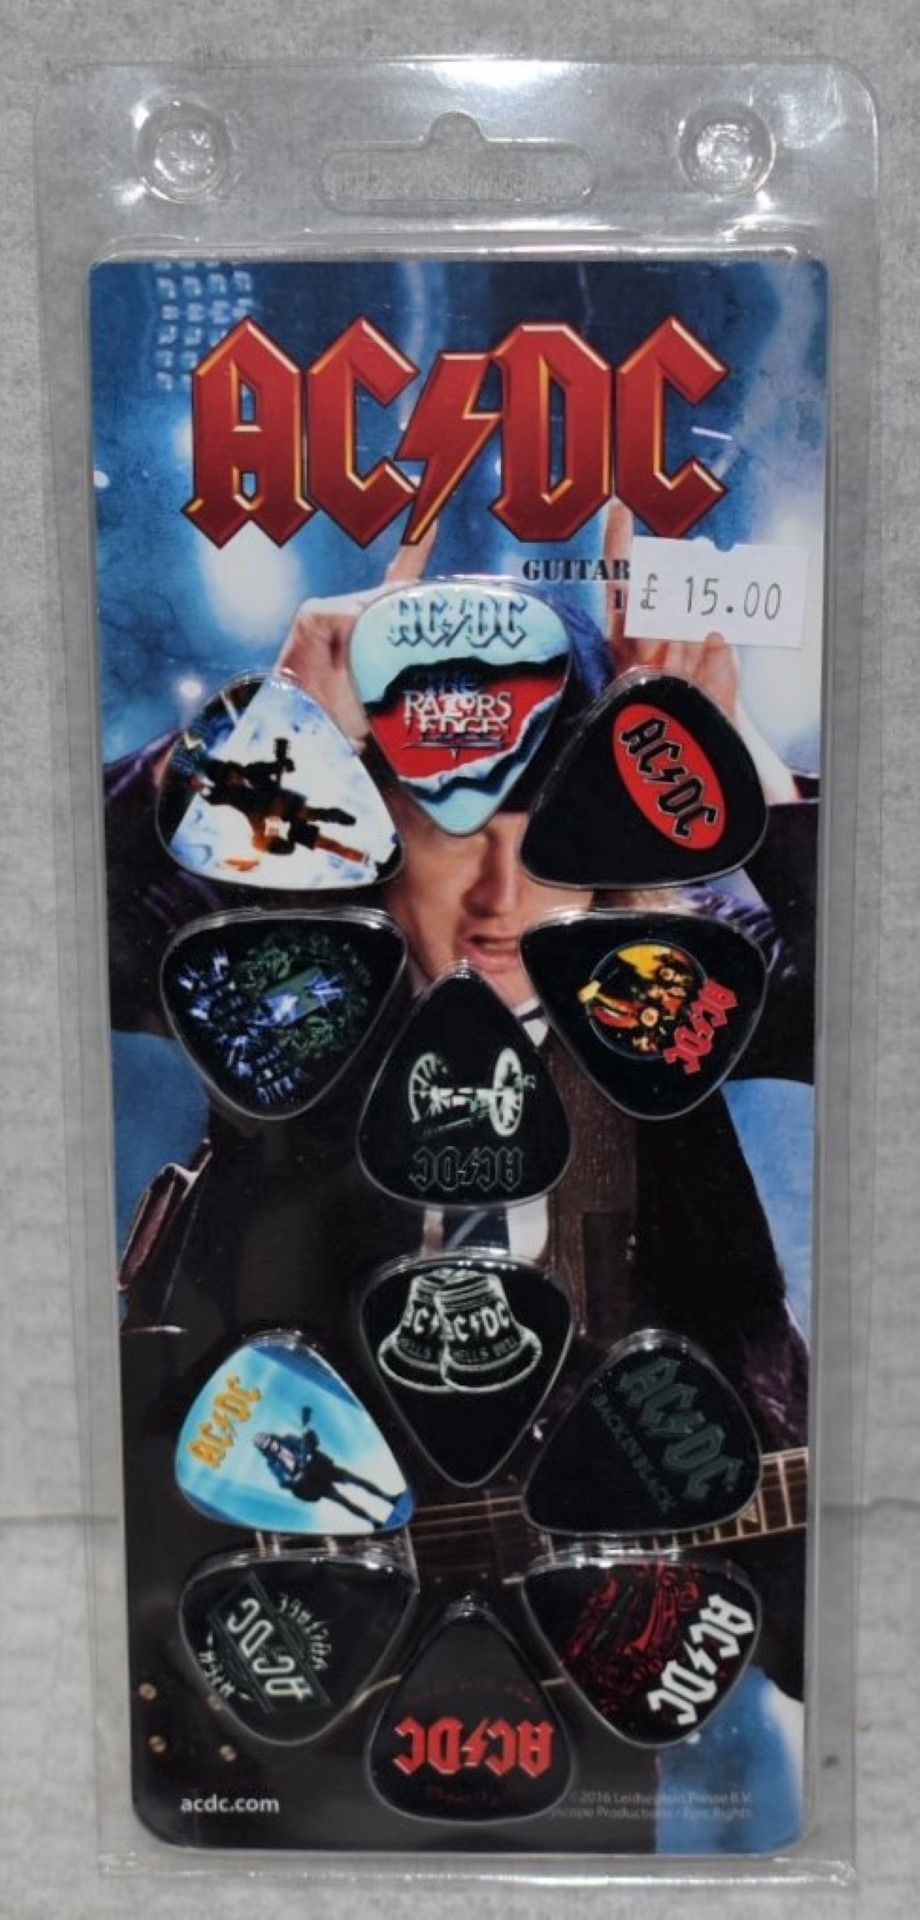 70 x Guitar Pick Multipacks By Perris - Bowie, Pink Floyd, Rush, Iron Maiden & ACDC - RRP £1,050 - Image 9 of 16